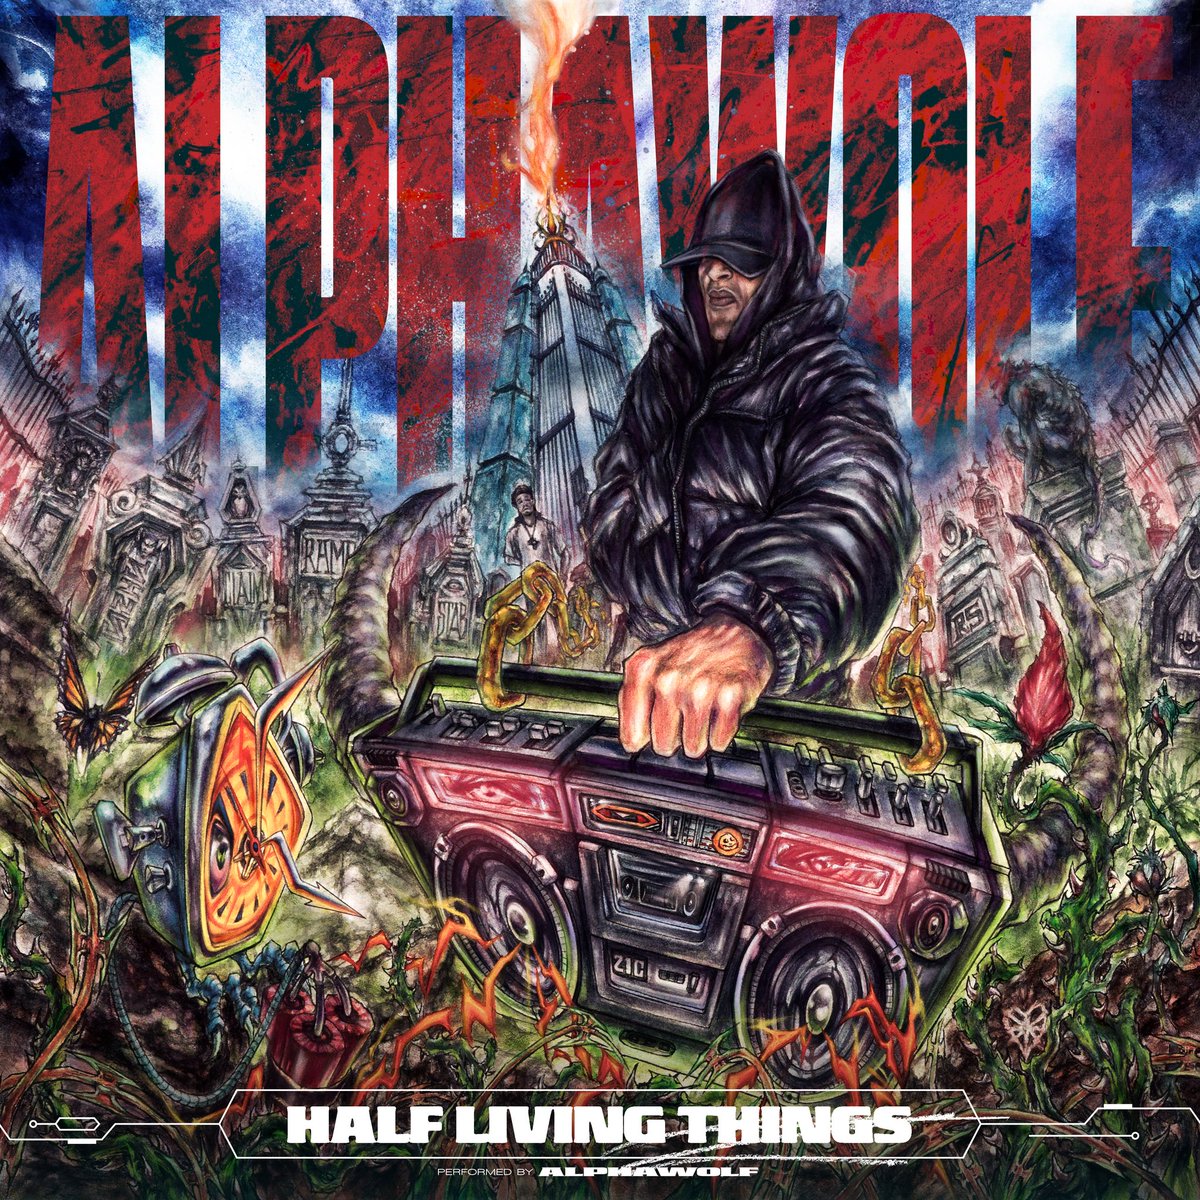 'Half Living Things' the new album by @AlphaWolfCVLT is out now! Stream & pick up your copy today bfan.link/half-living-th…